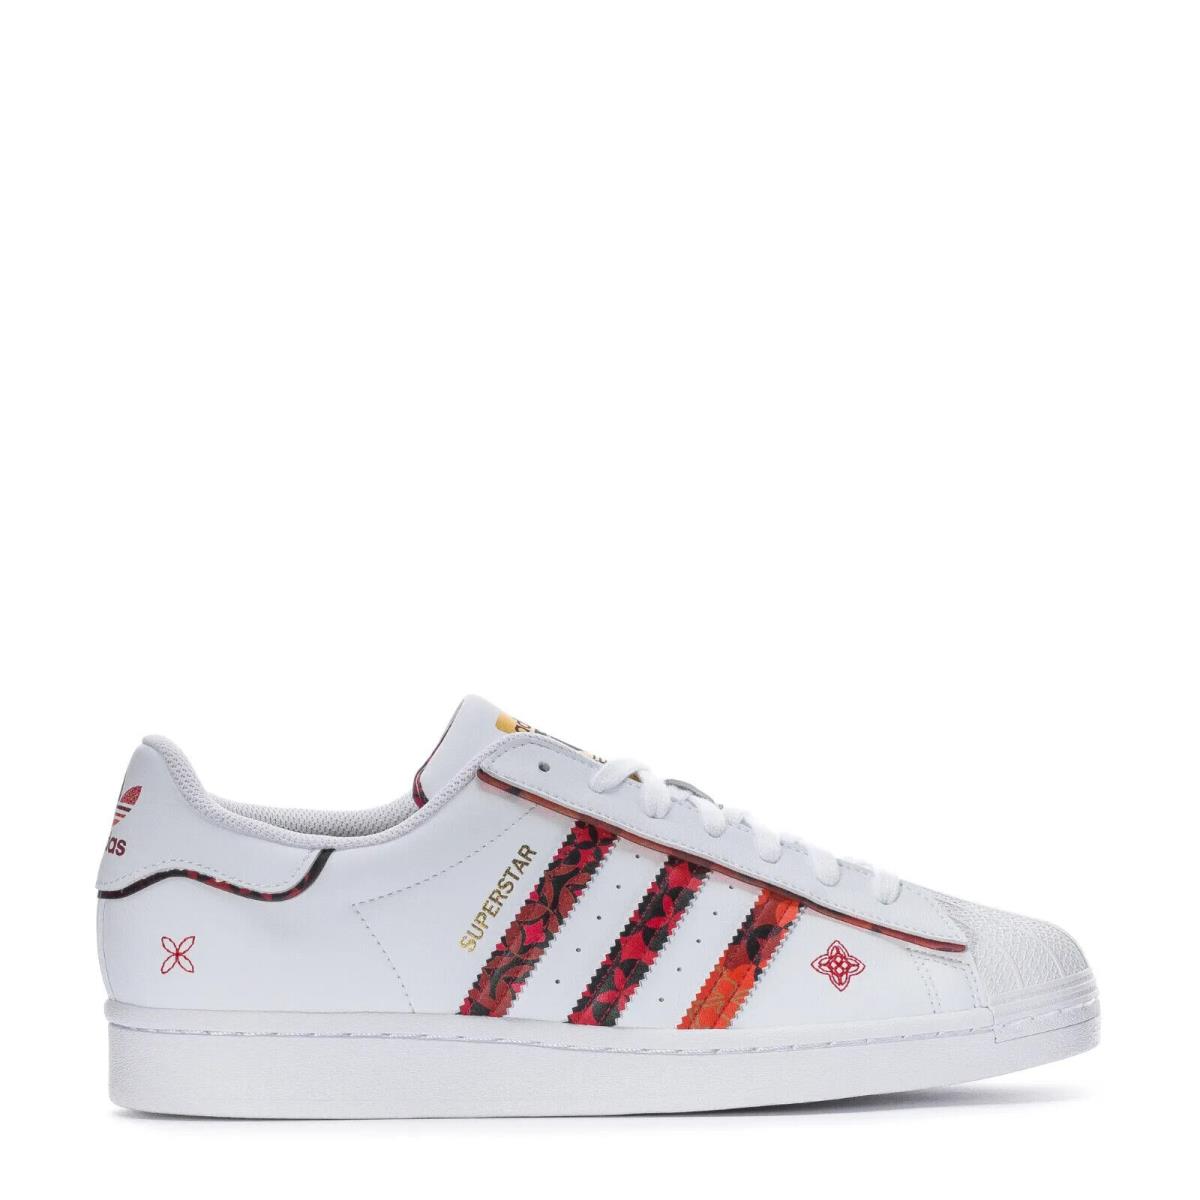 Mens Adidas Superstar GX8839 Year of The Tiger White/gold Metallic Shoes